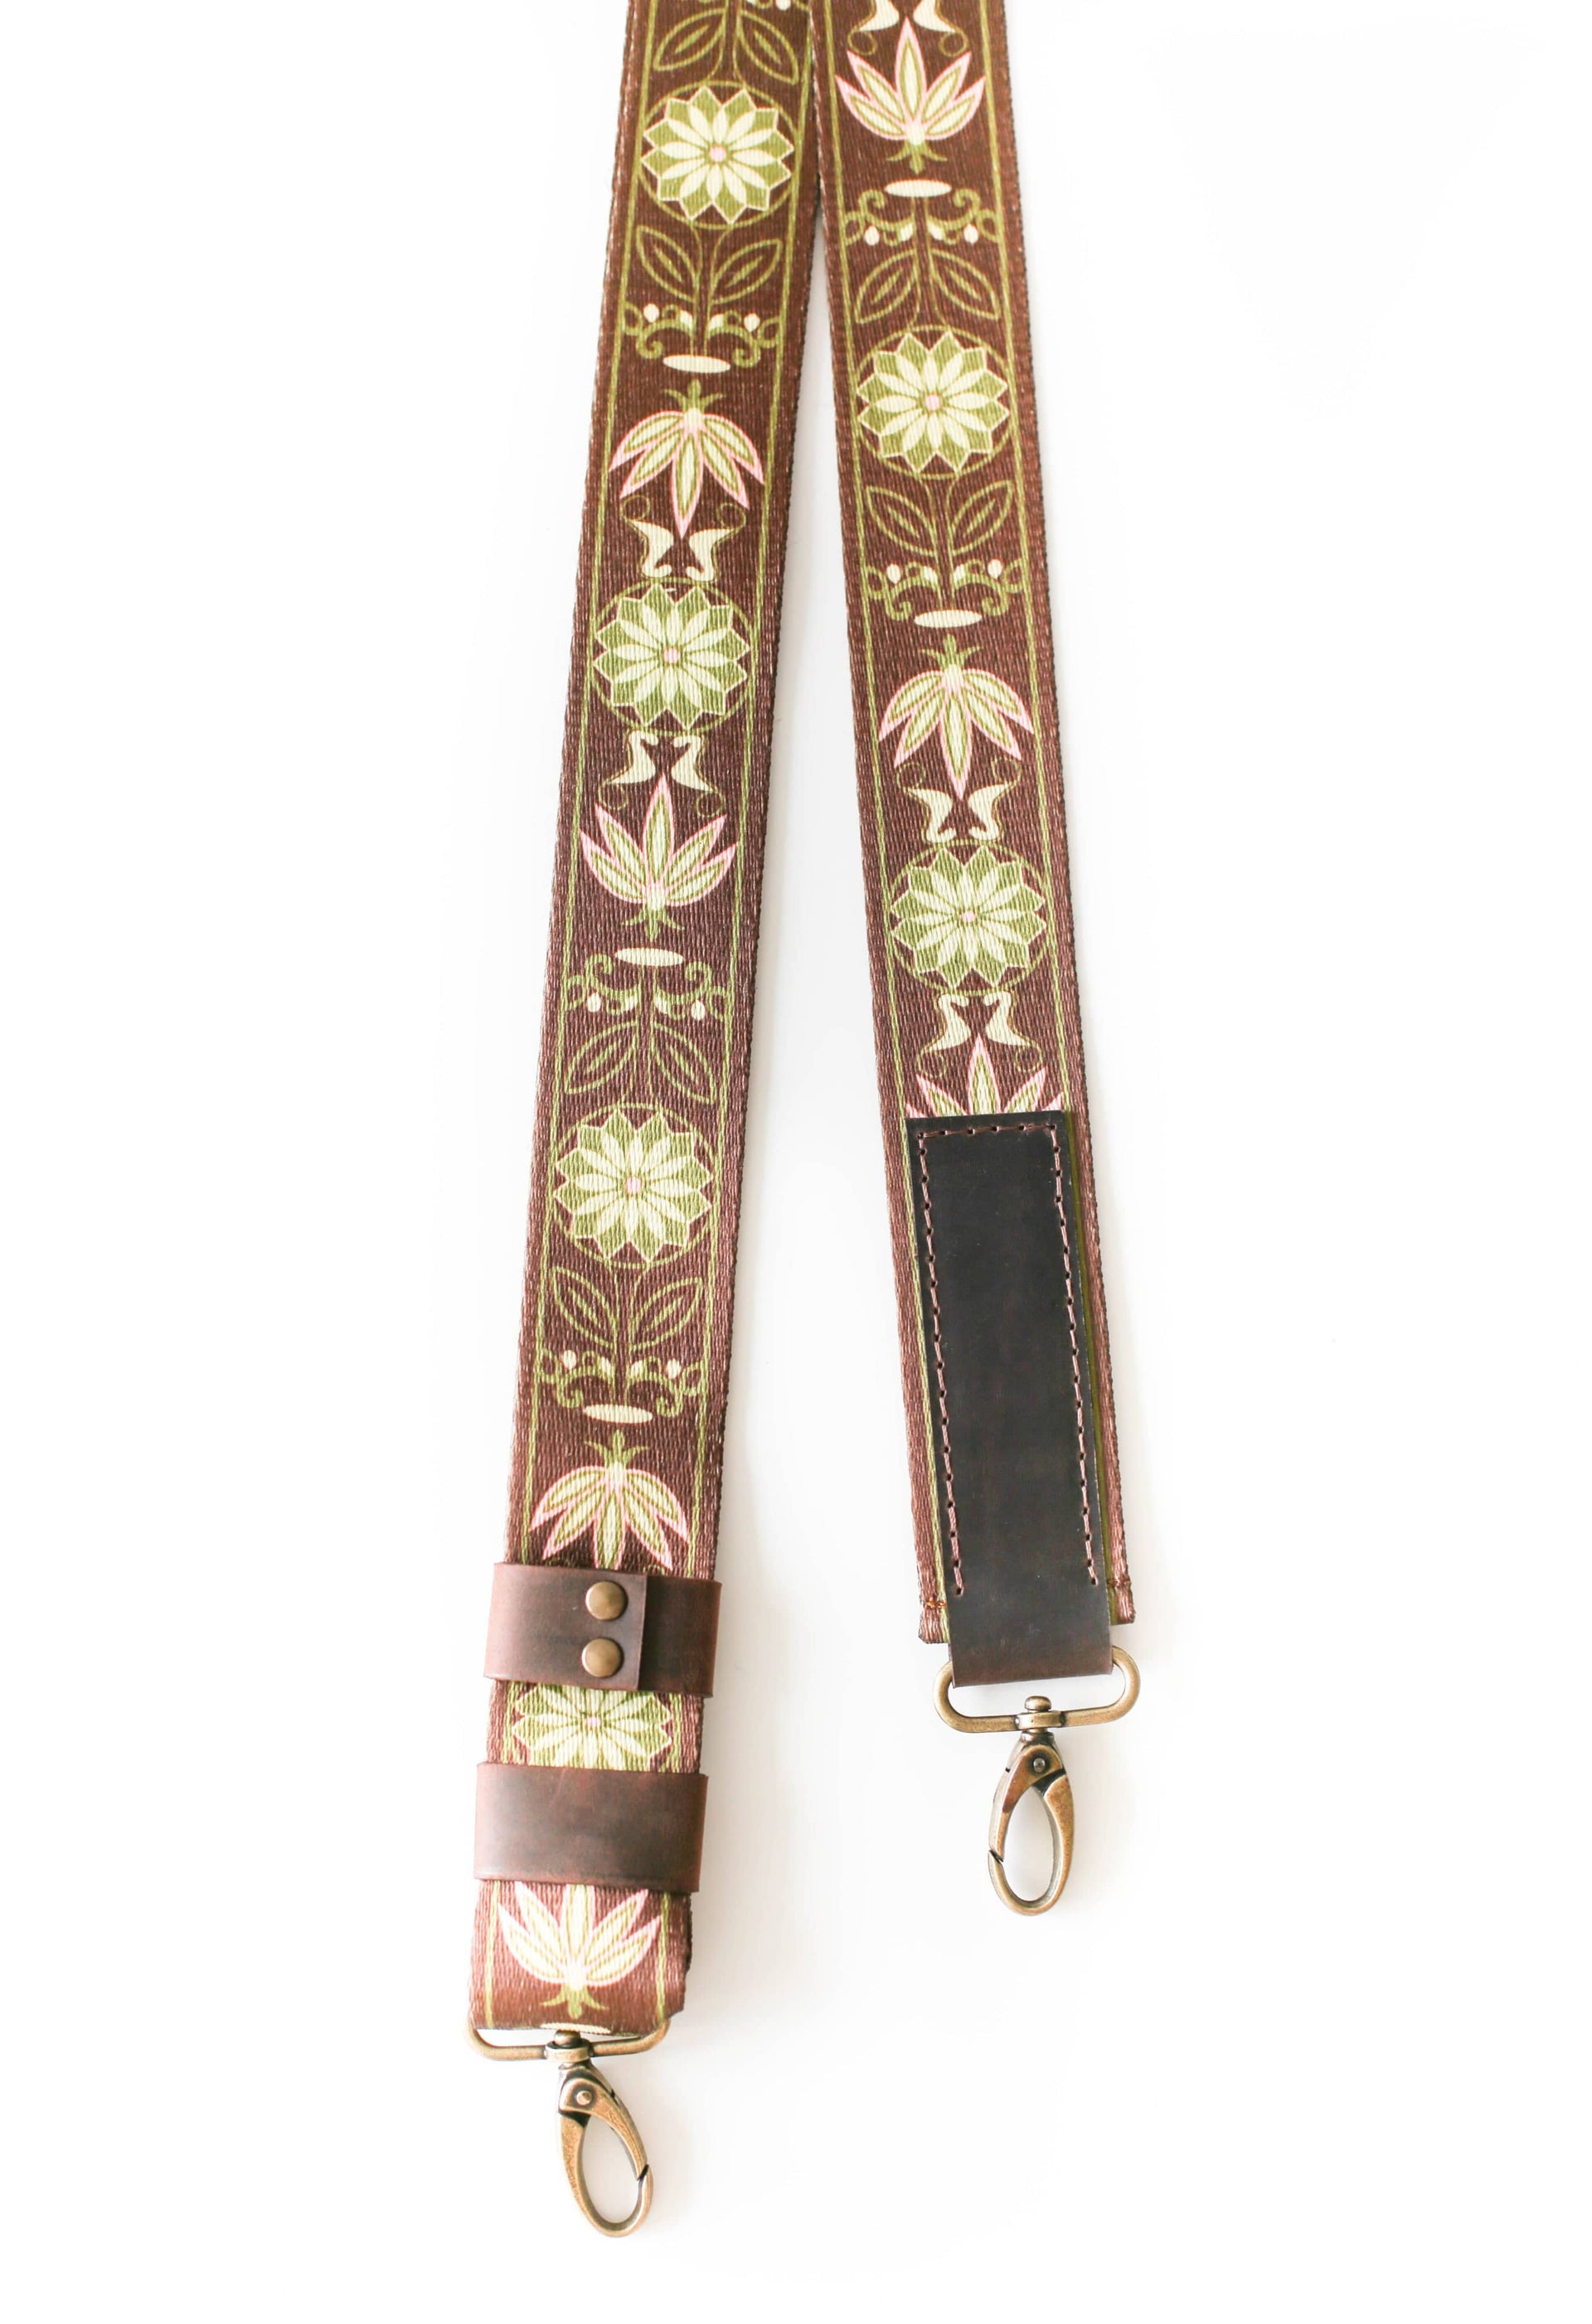 Upgrade Your Bag Style With Customized Guitar Purse Straps 